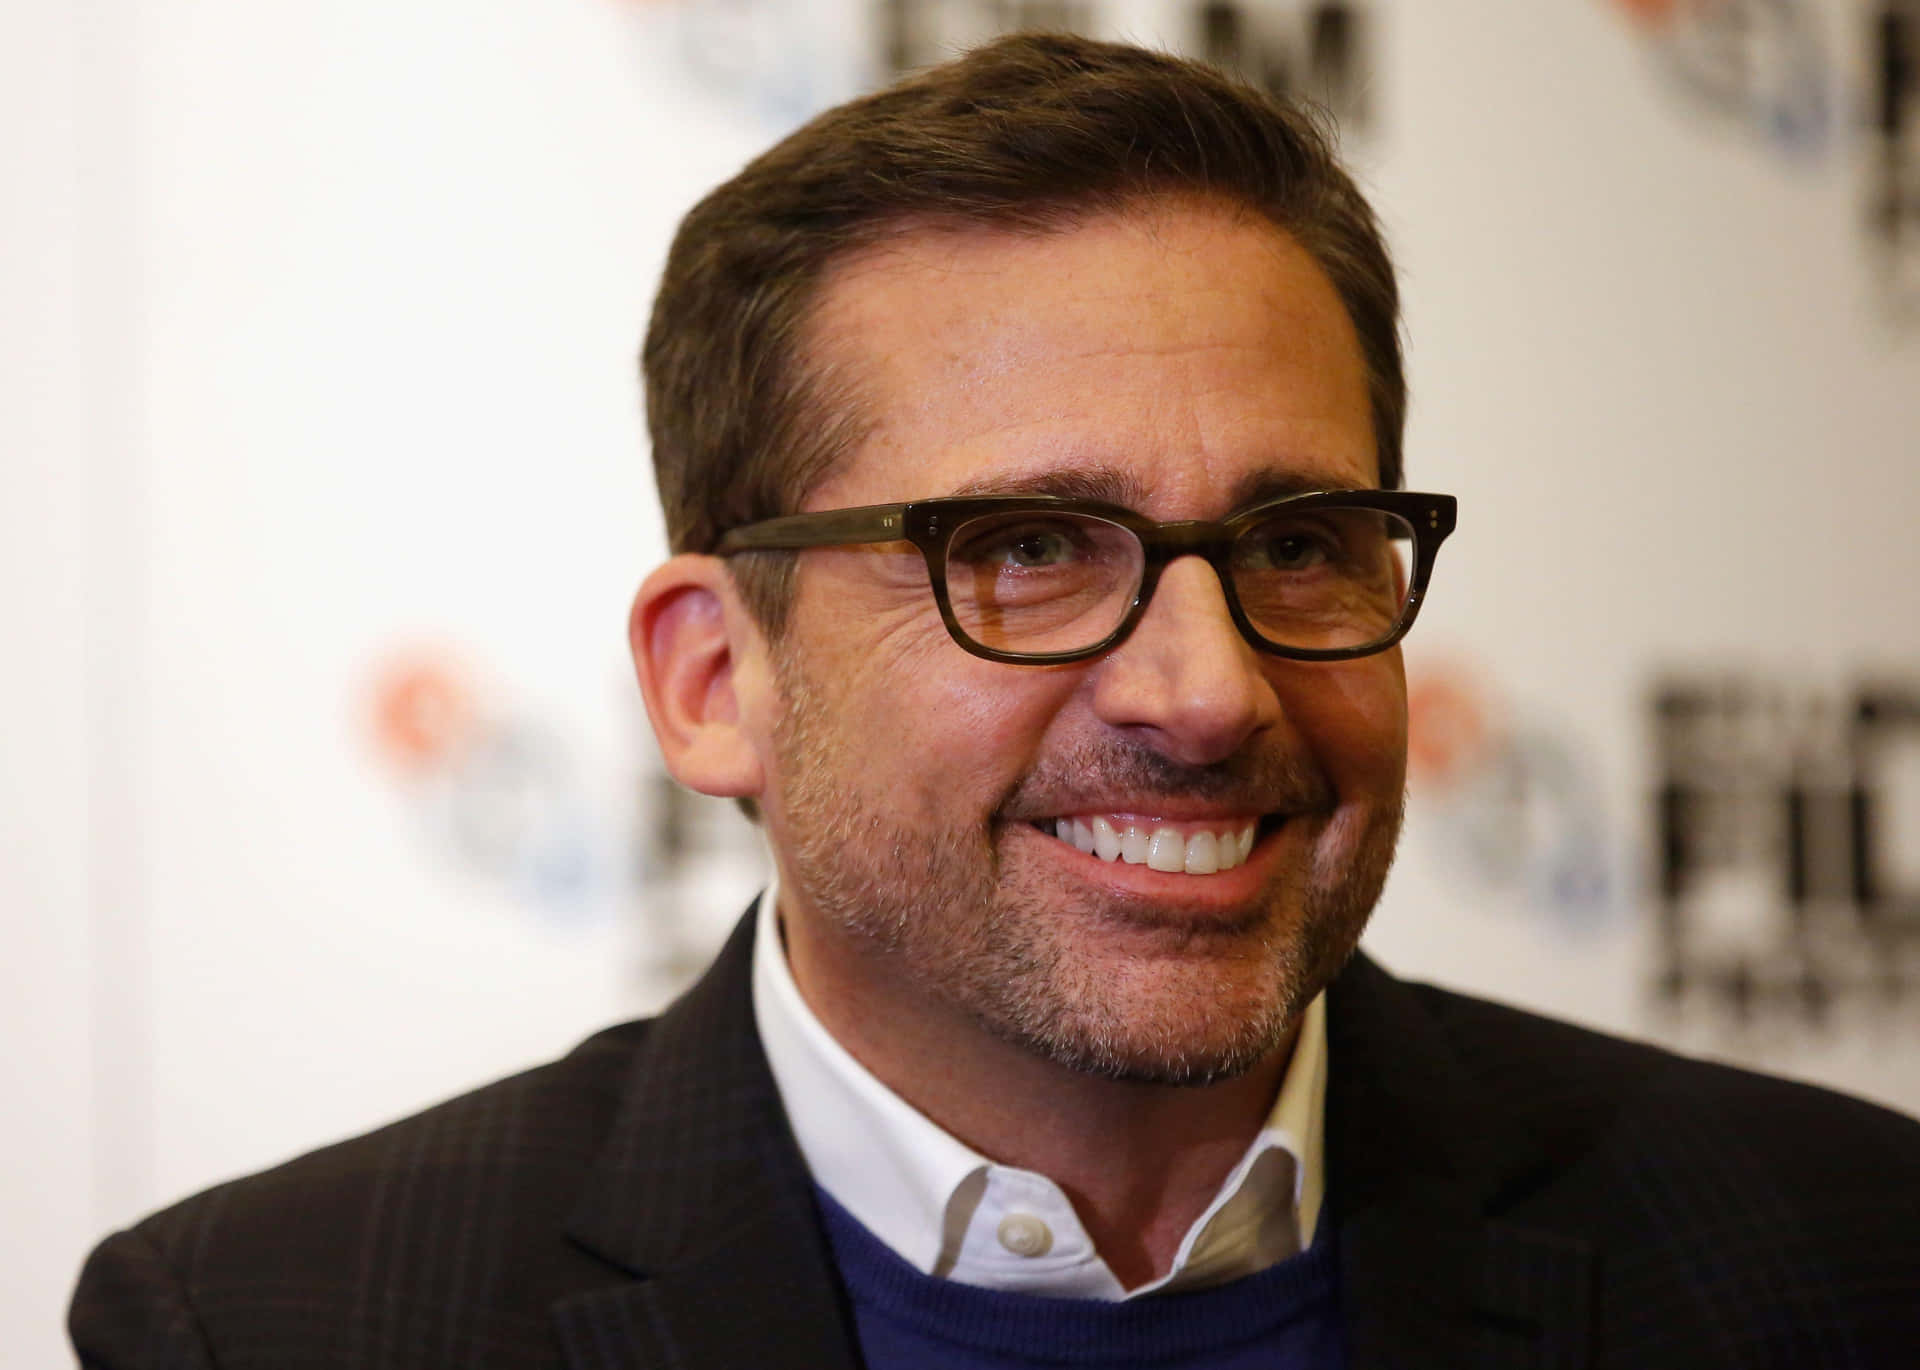 Steve Carell, Actor and Comedian Wallpaper